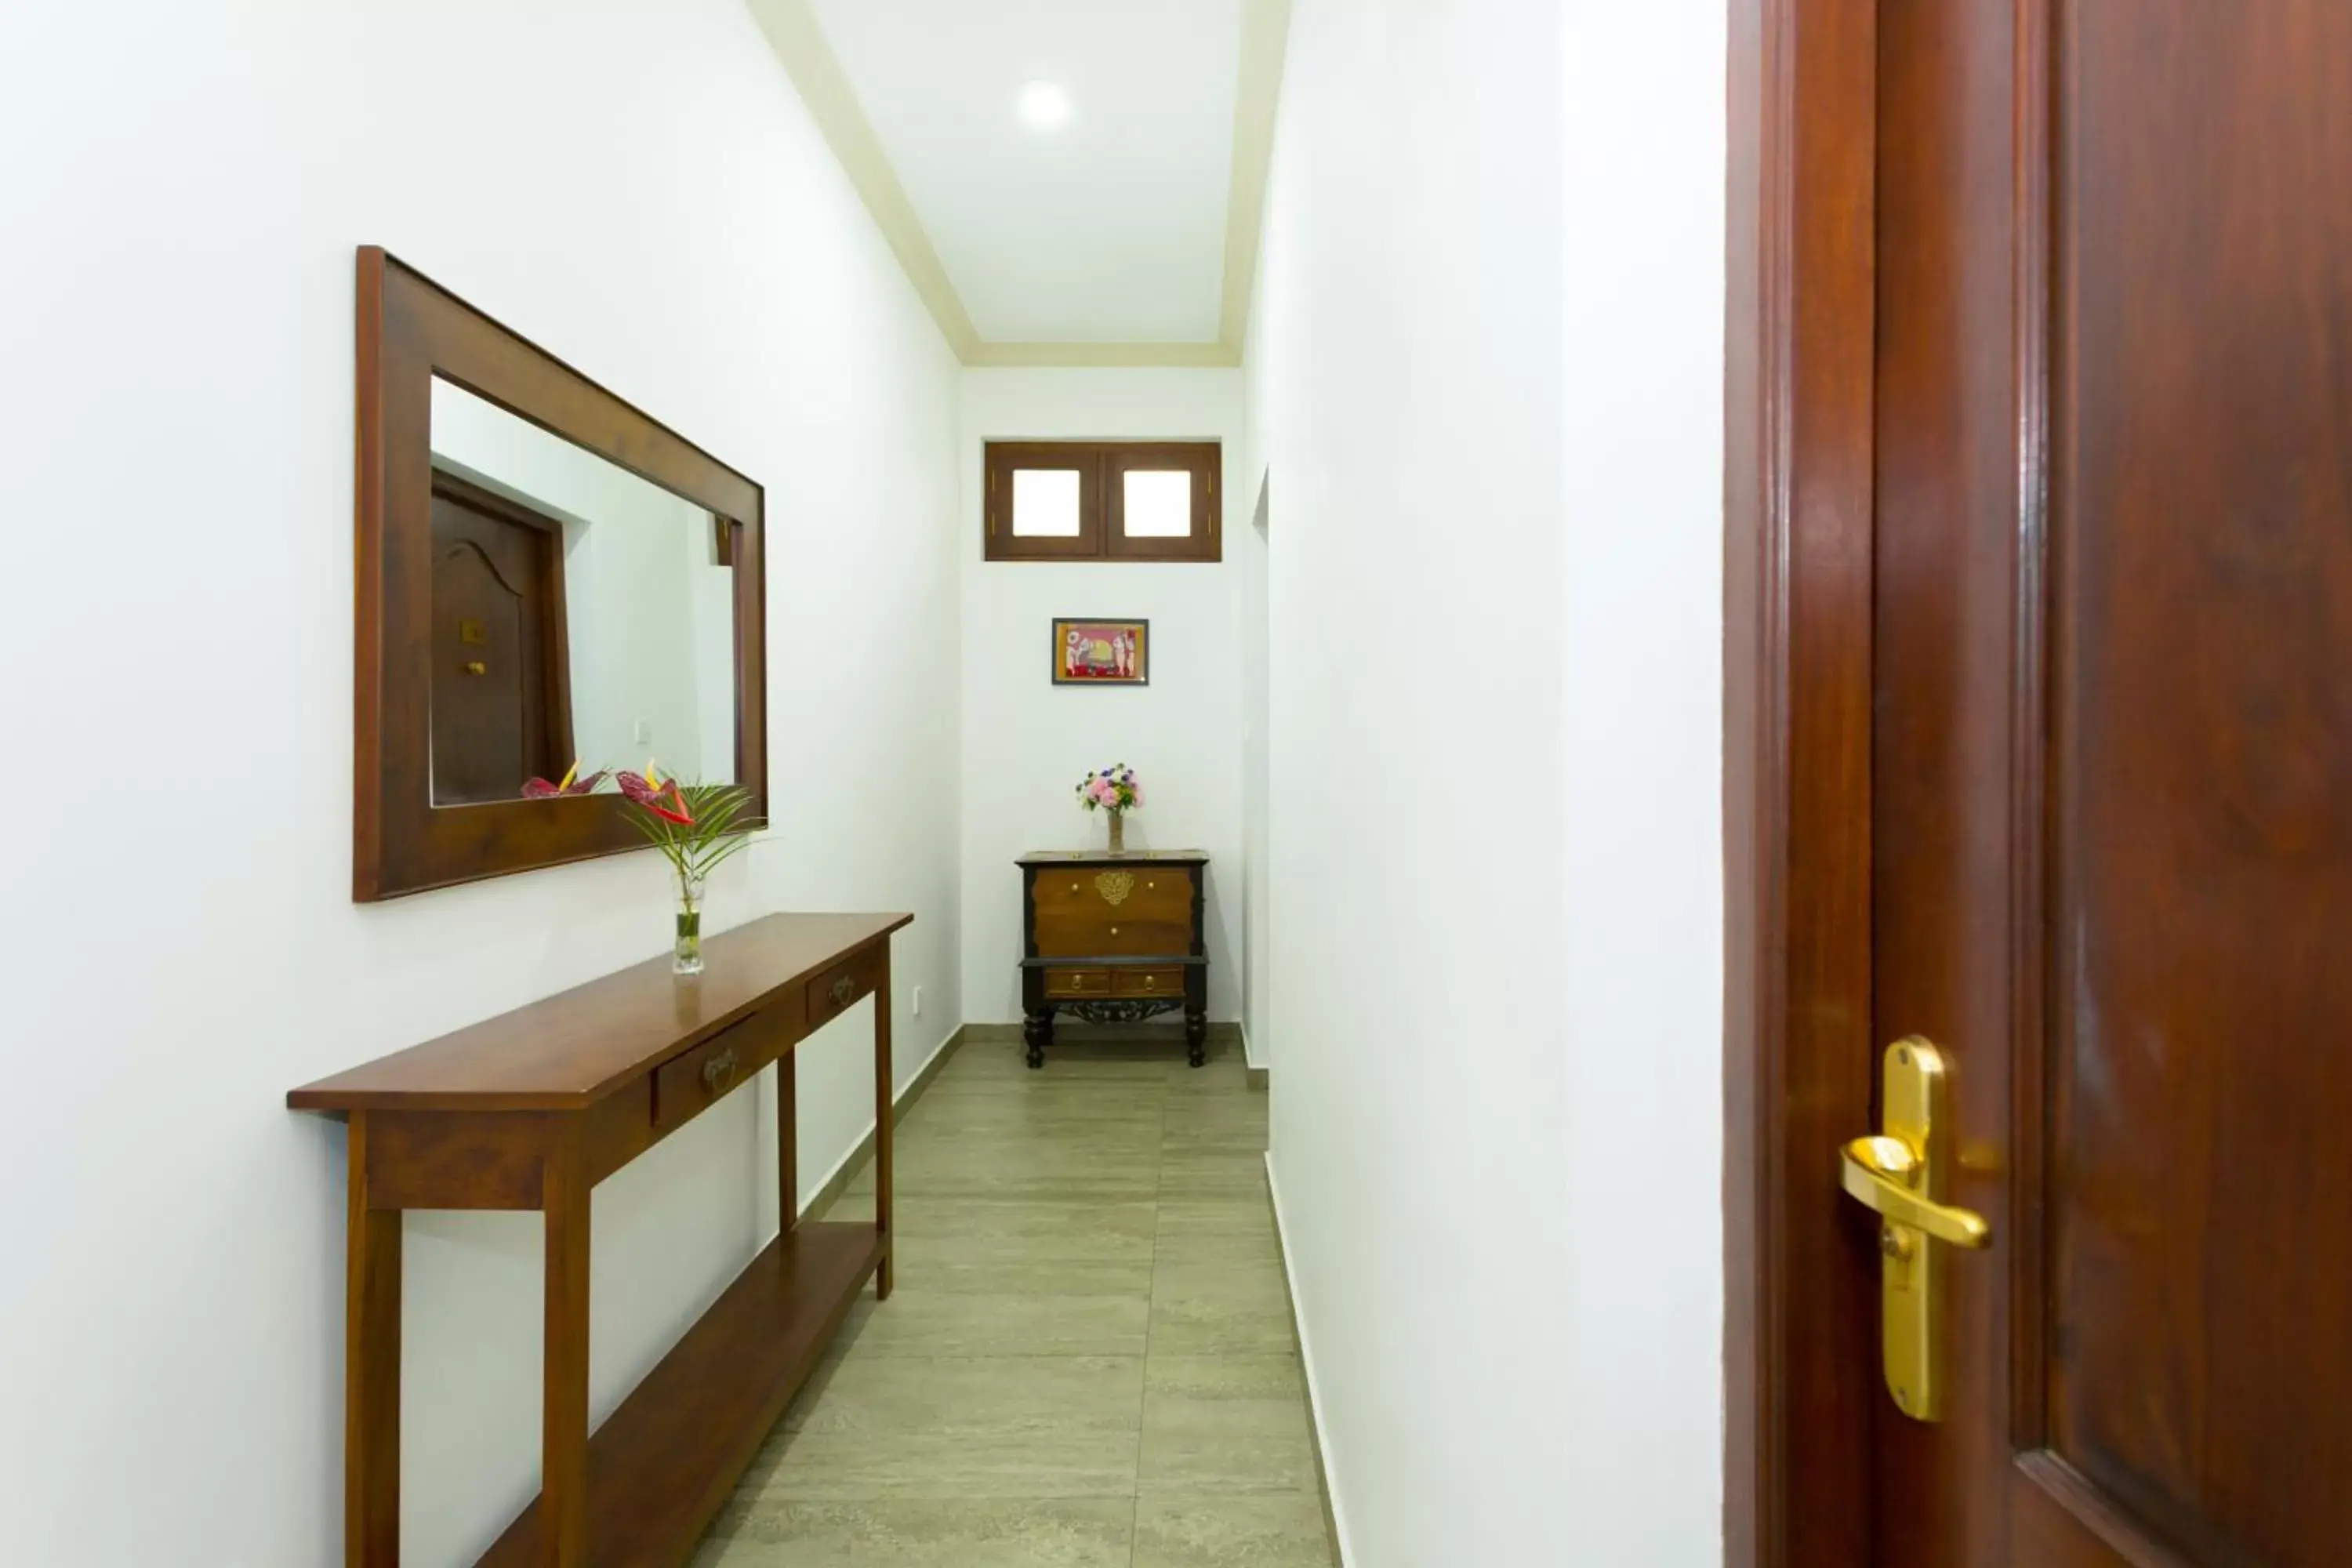 Area and facilities in Hotel Yo Kandy